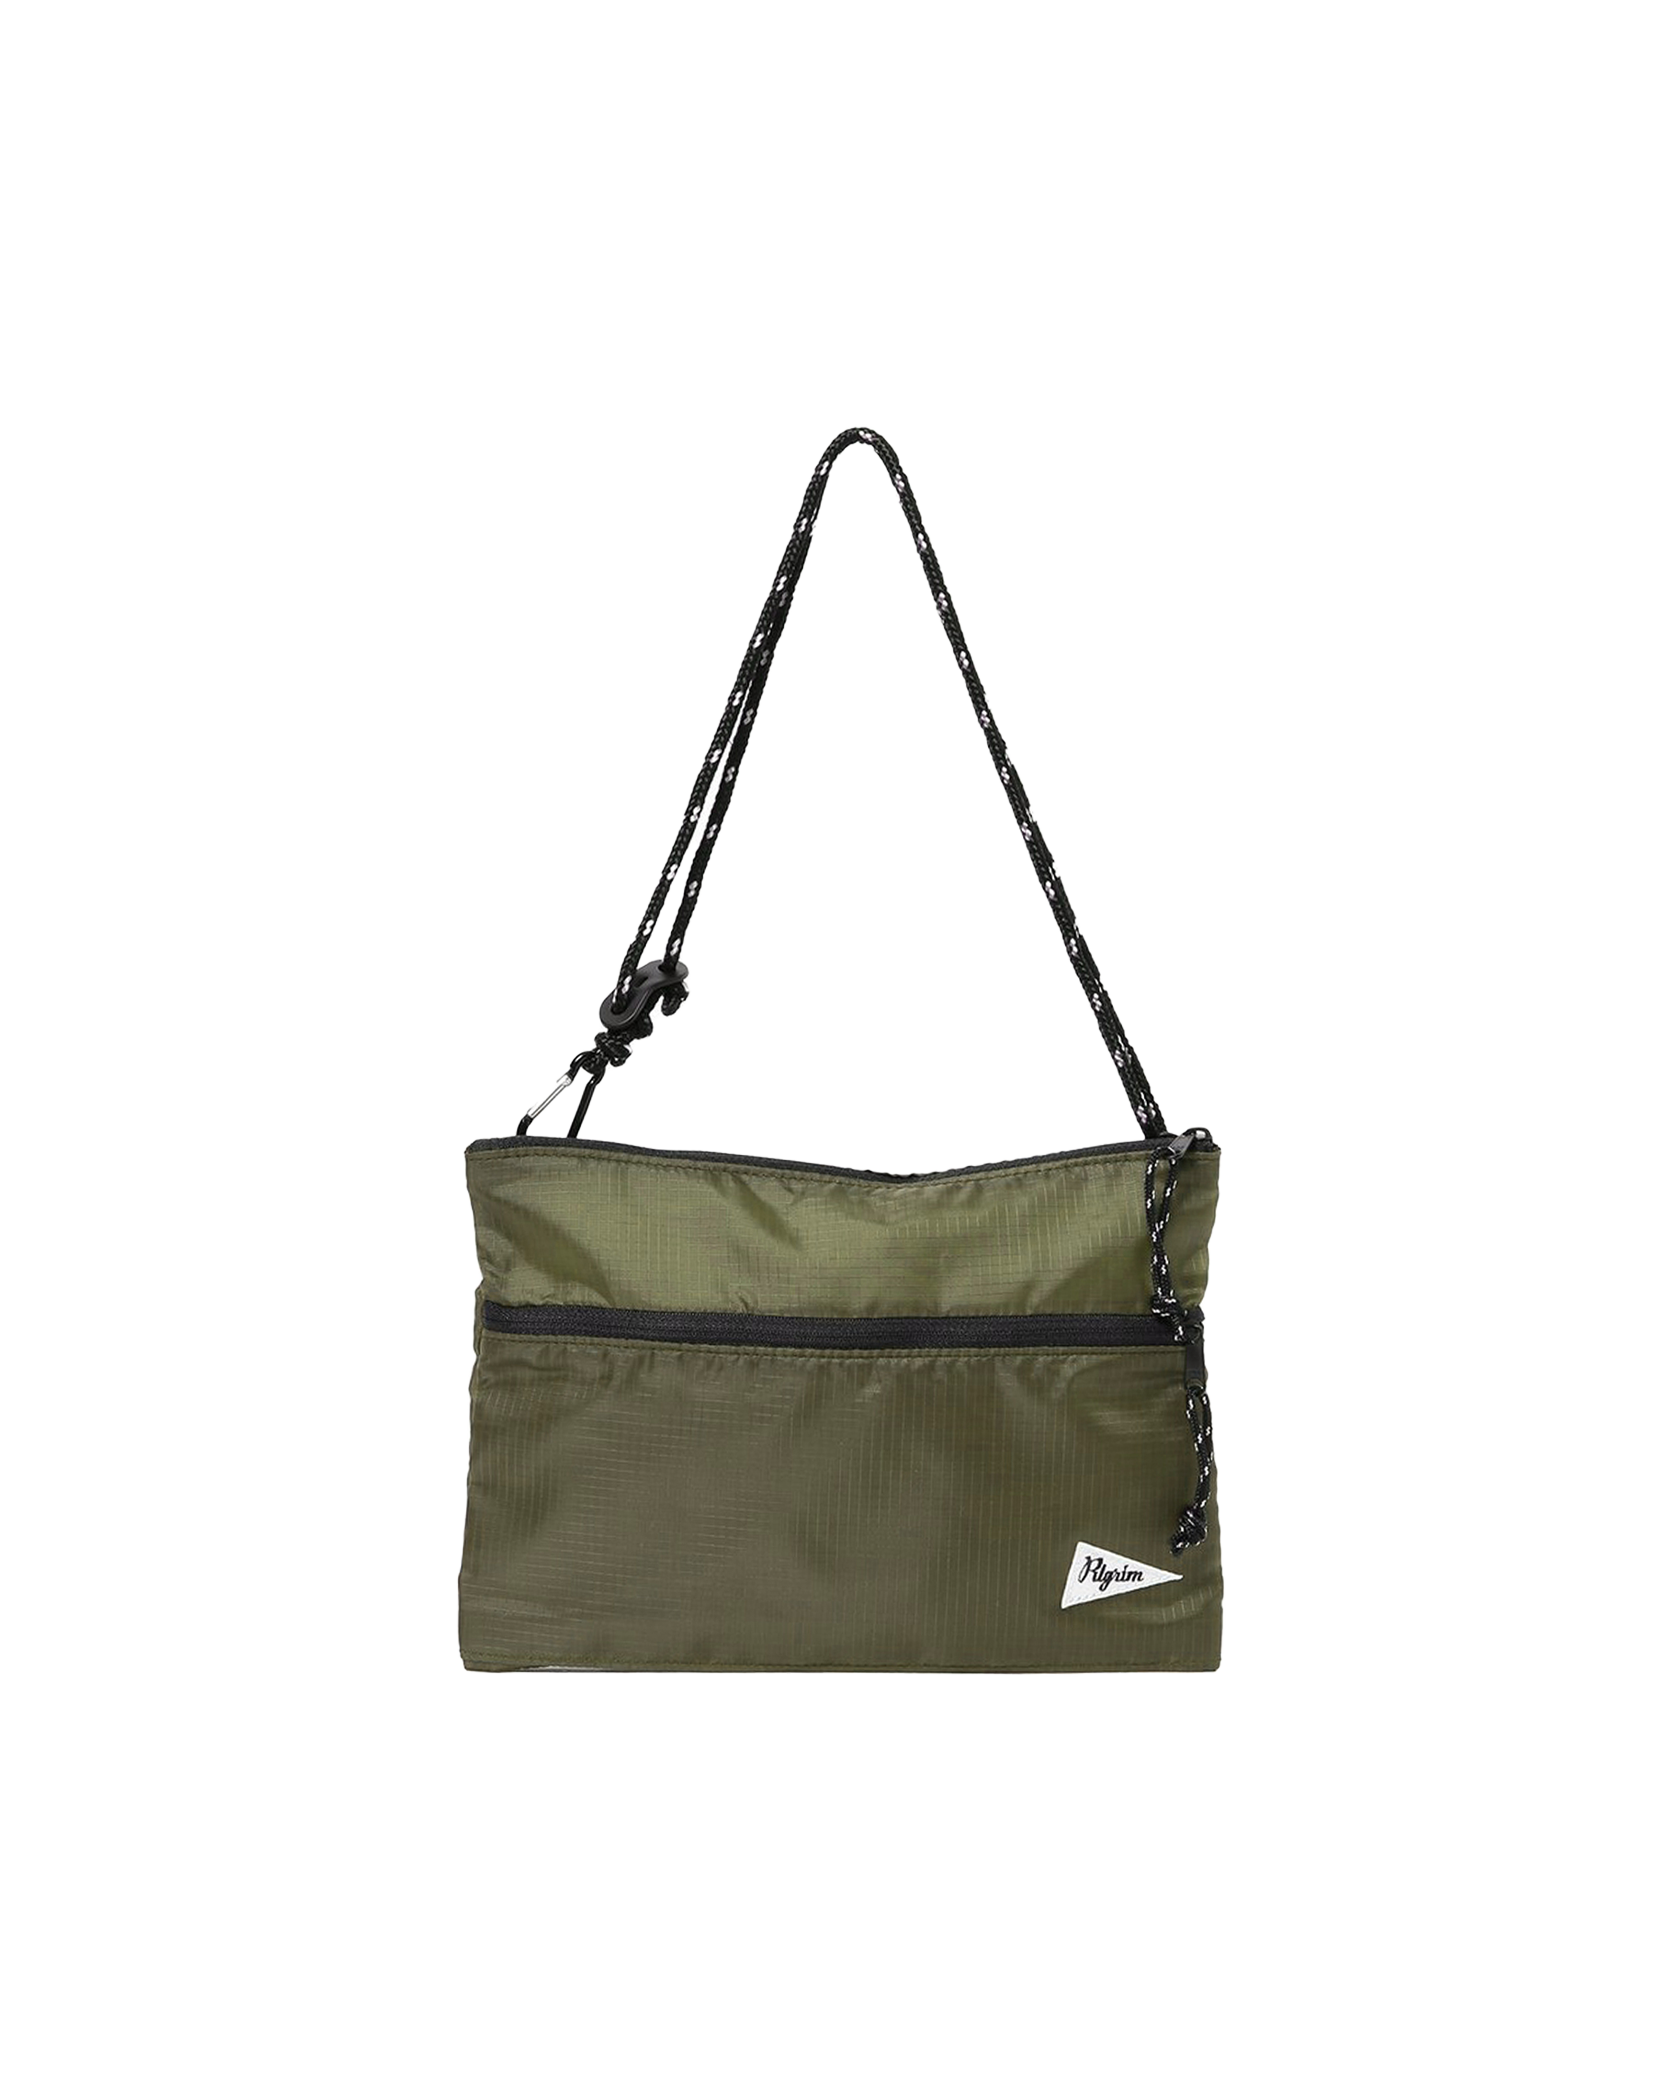 Pilgrim Surf + Supply - Accessory - Ripstop Sacoche - Bag - Olive